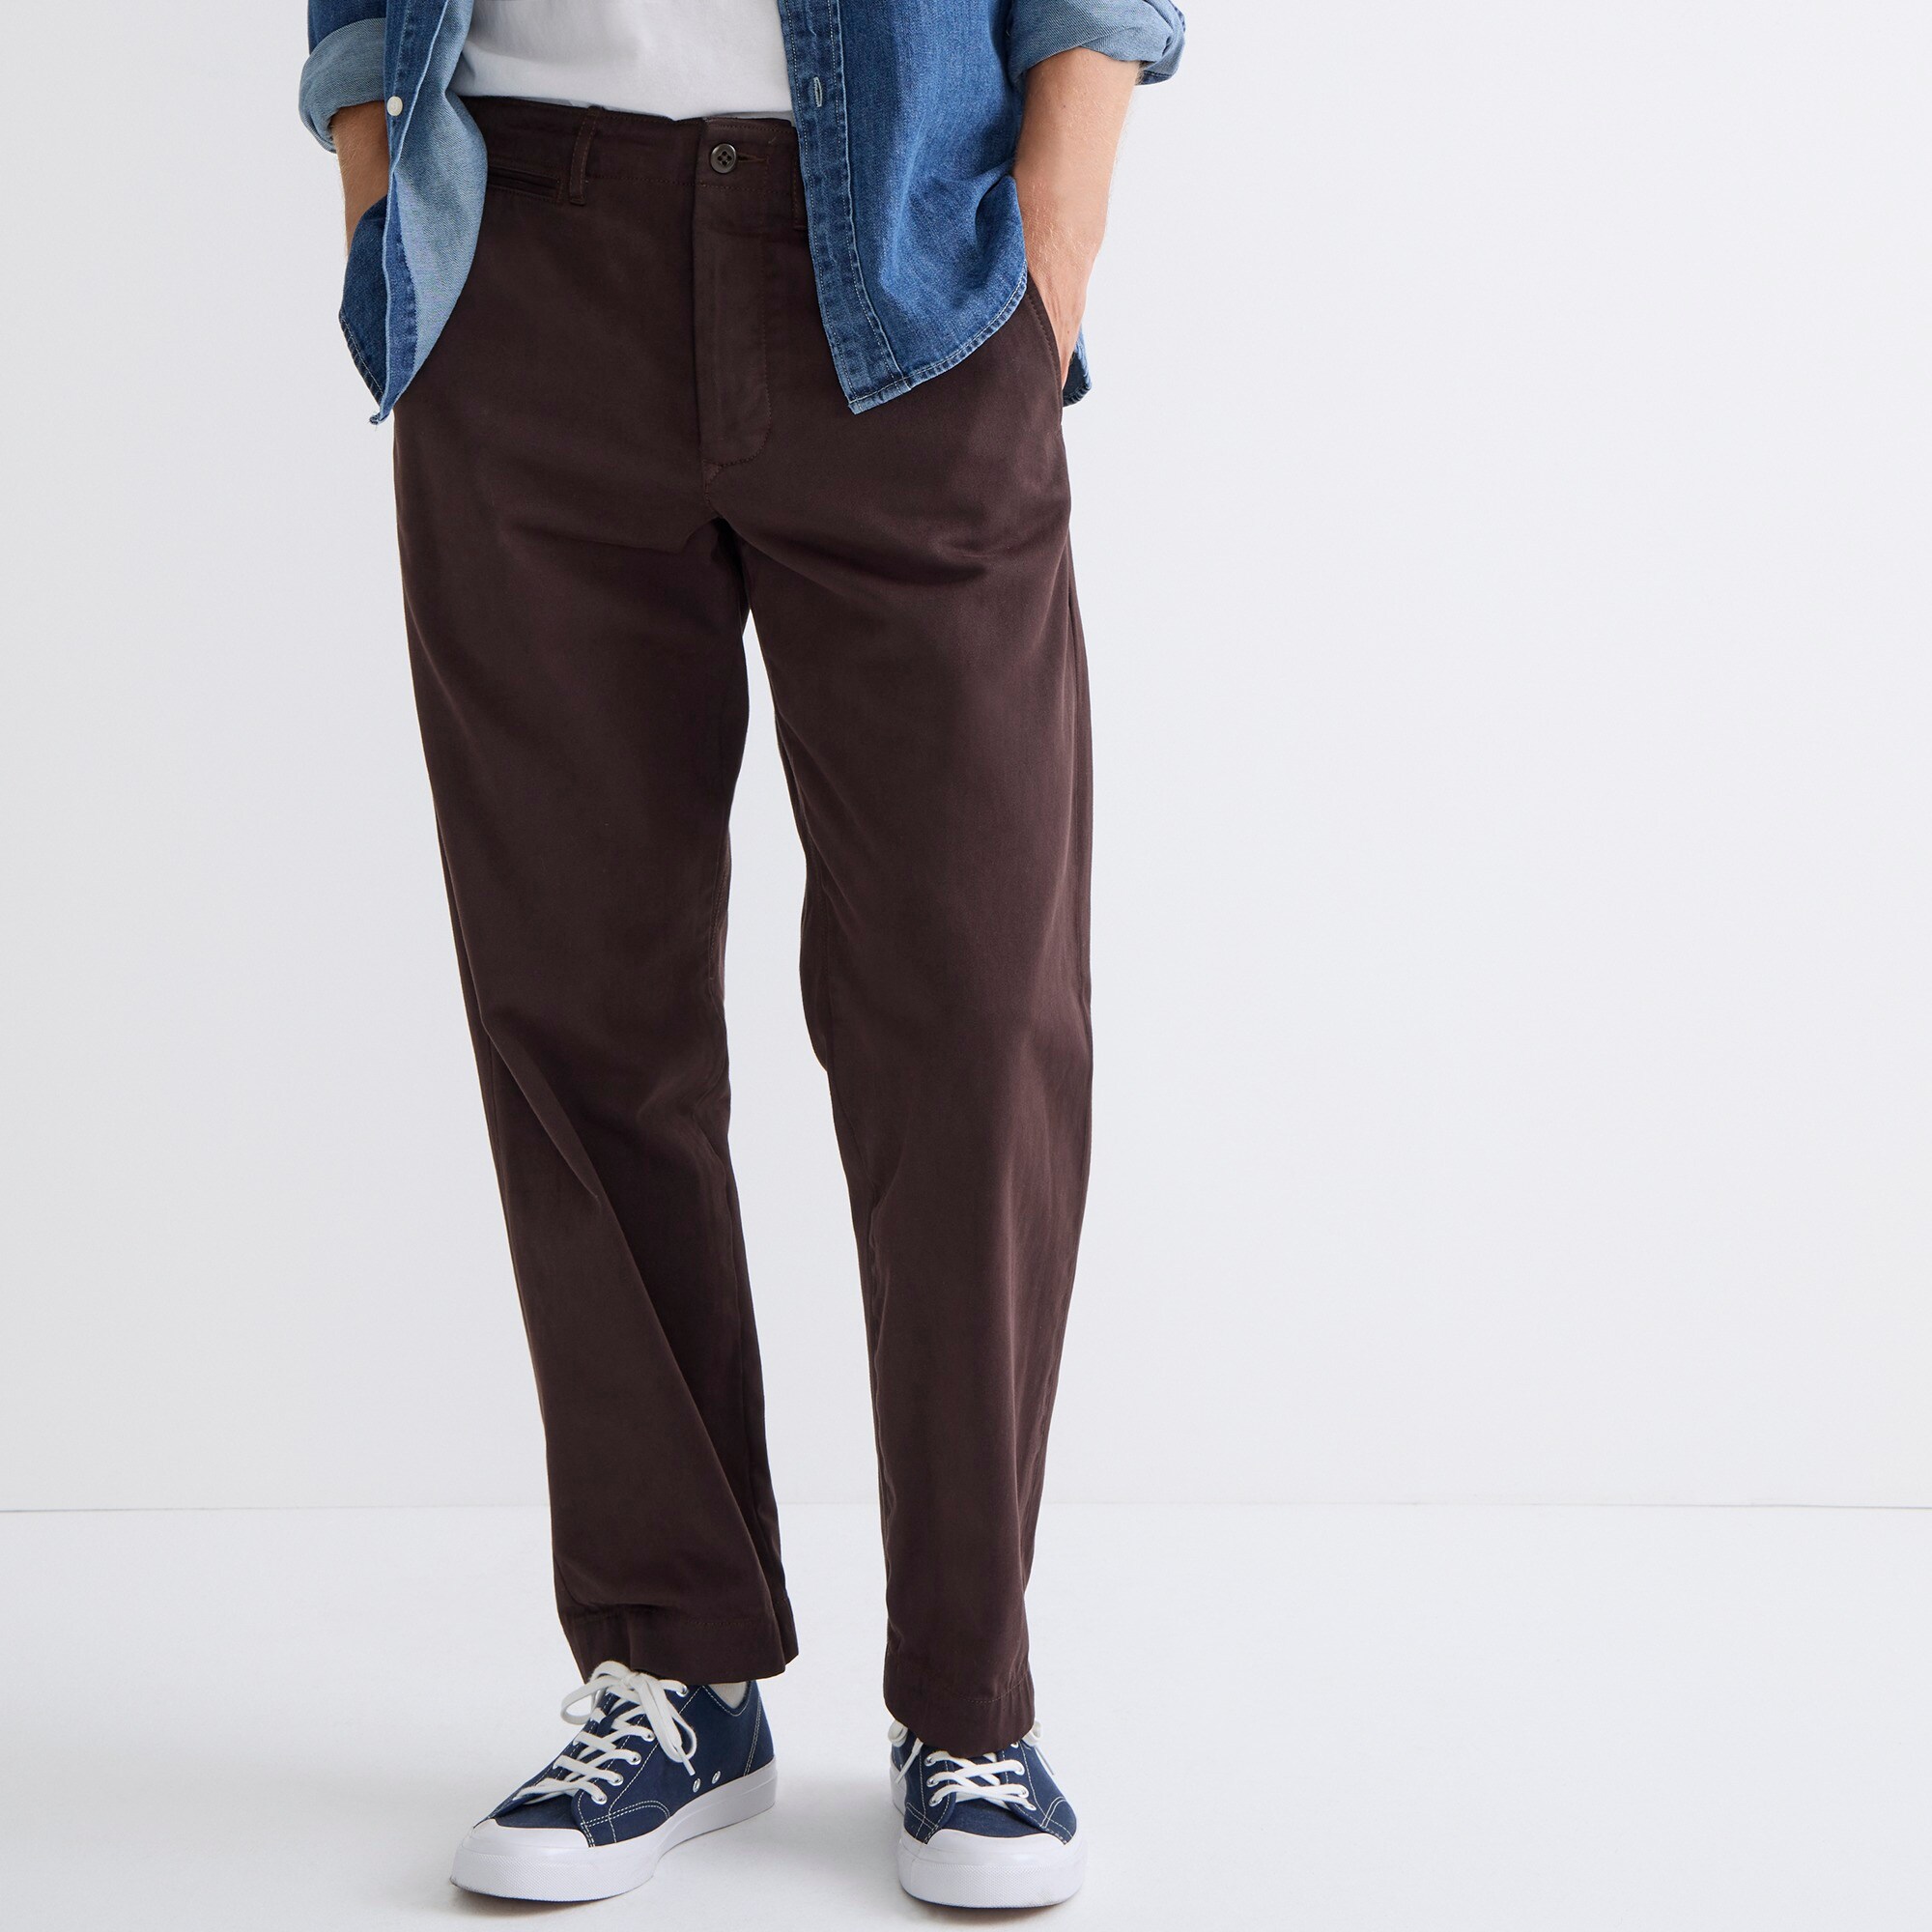 mens Wallace &amp; Barnes selvedge officer chino pant